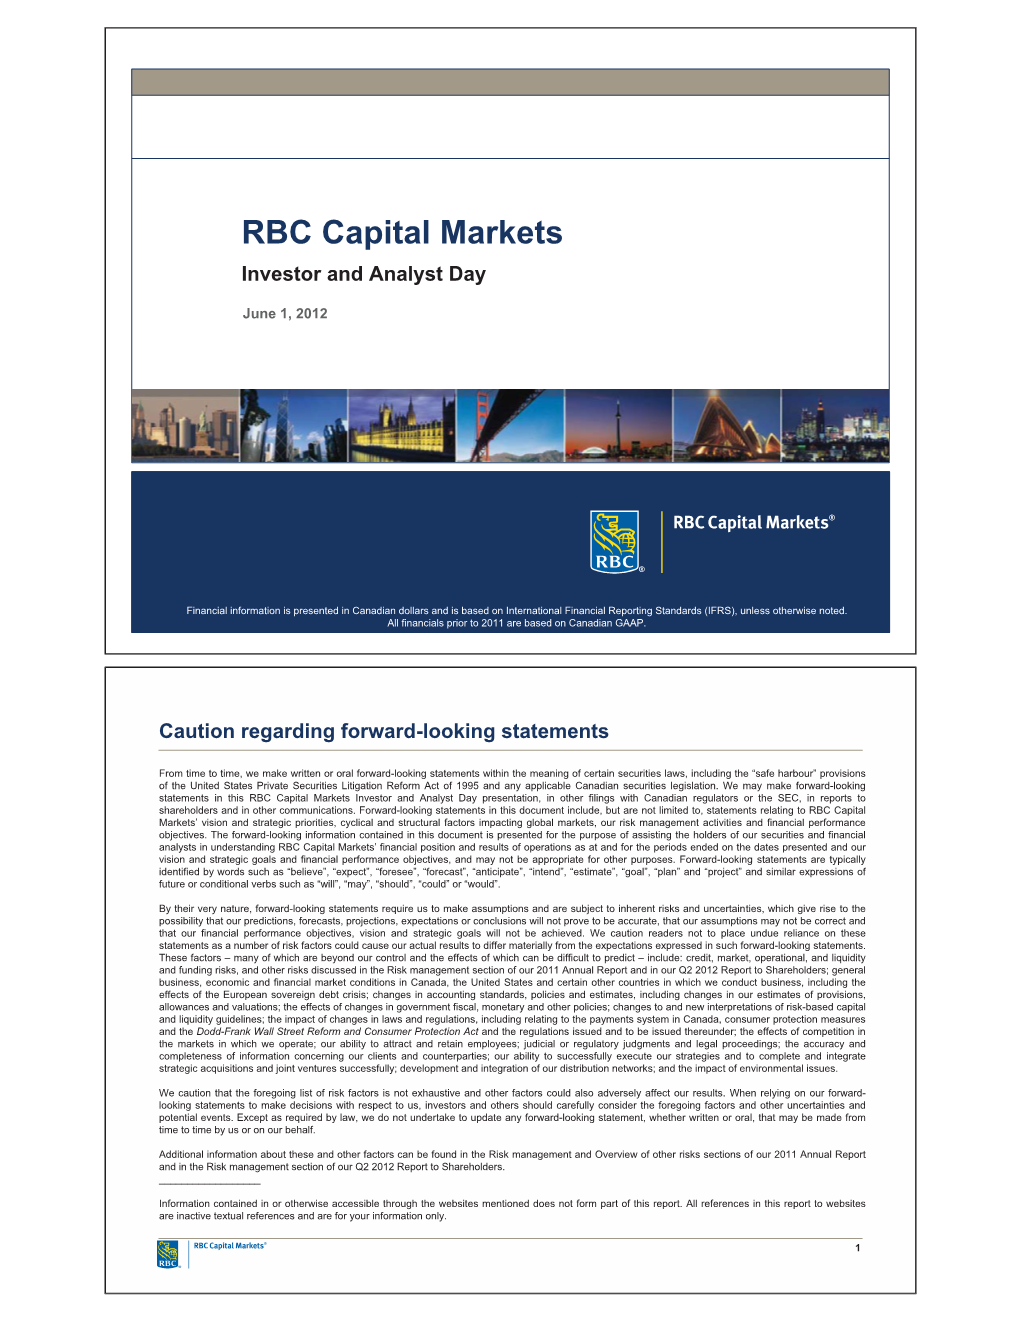 RBC Capital Markets Investor and Analyst Day